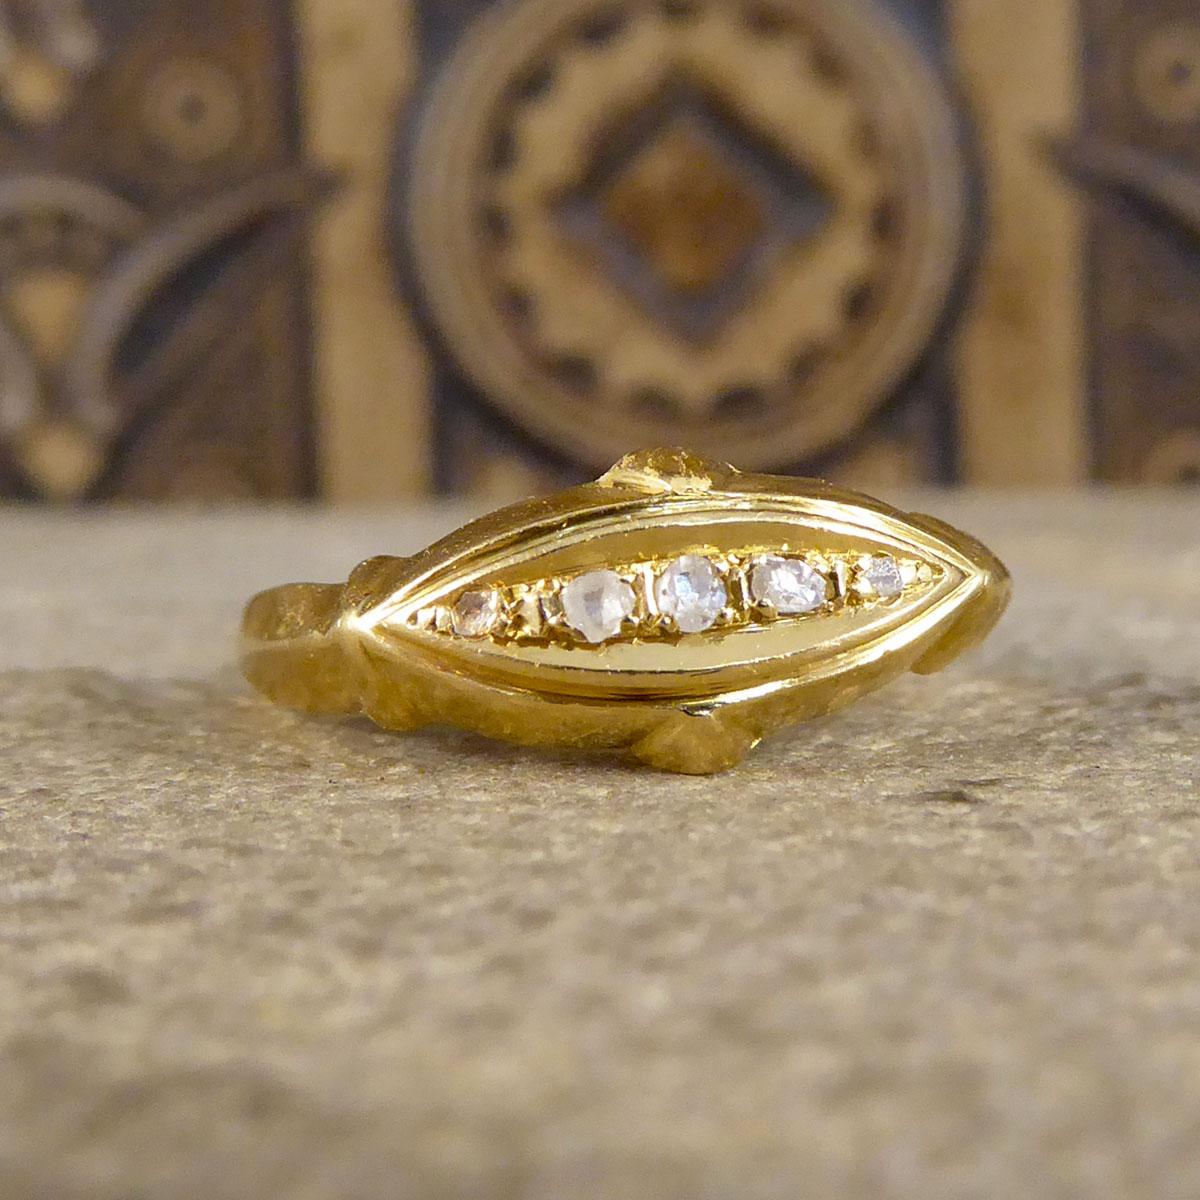 Such a lovely little antique ring that has been hand crafted in the Edwardian era with clear hallmarks on the inner band showing it was made in Birmingham 1912 from 18ct Yellow Gold. The ring has five small Rose Cut Diamonds in a navette shaped face